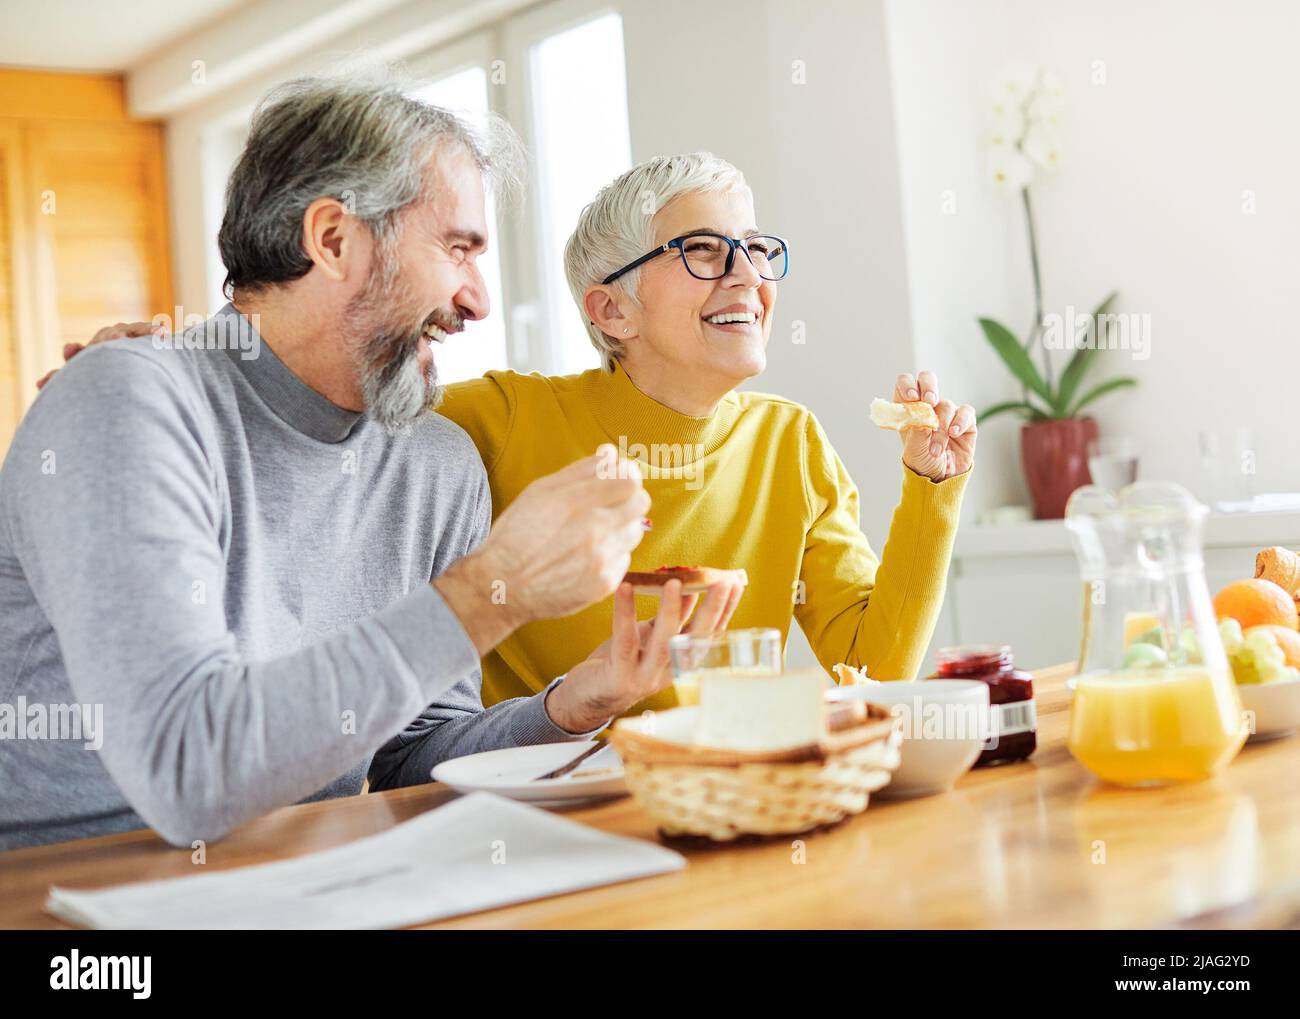 senior couple breakfast home food lifestyle eating table home man woman together husband wife family Stock Photo